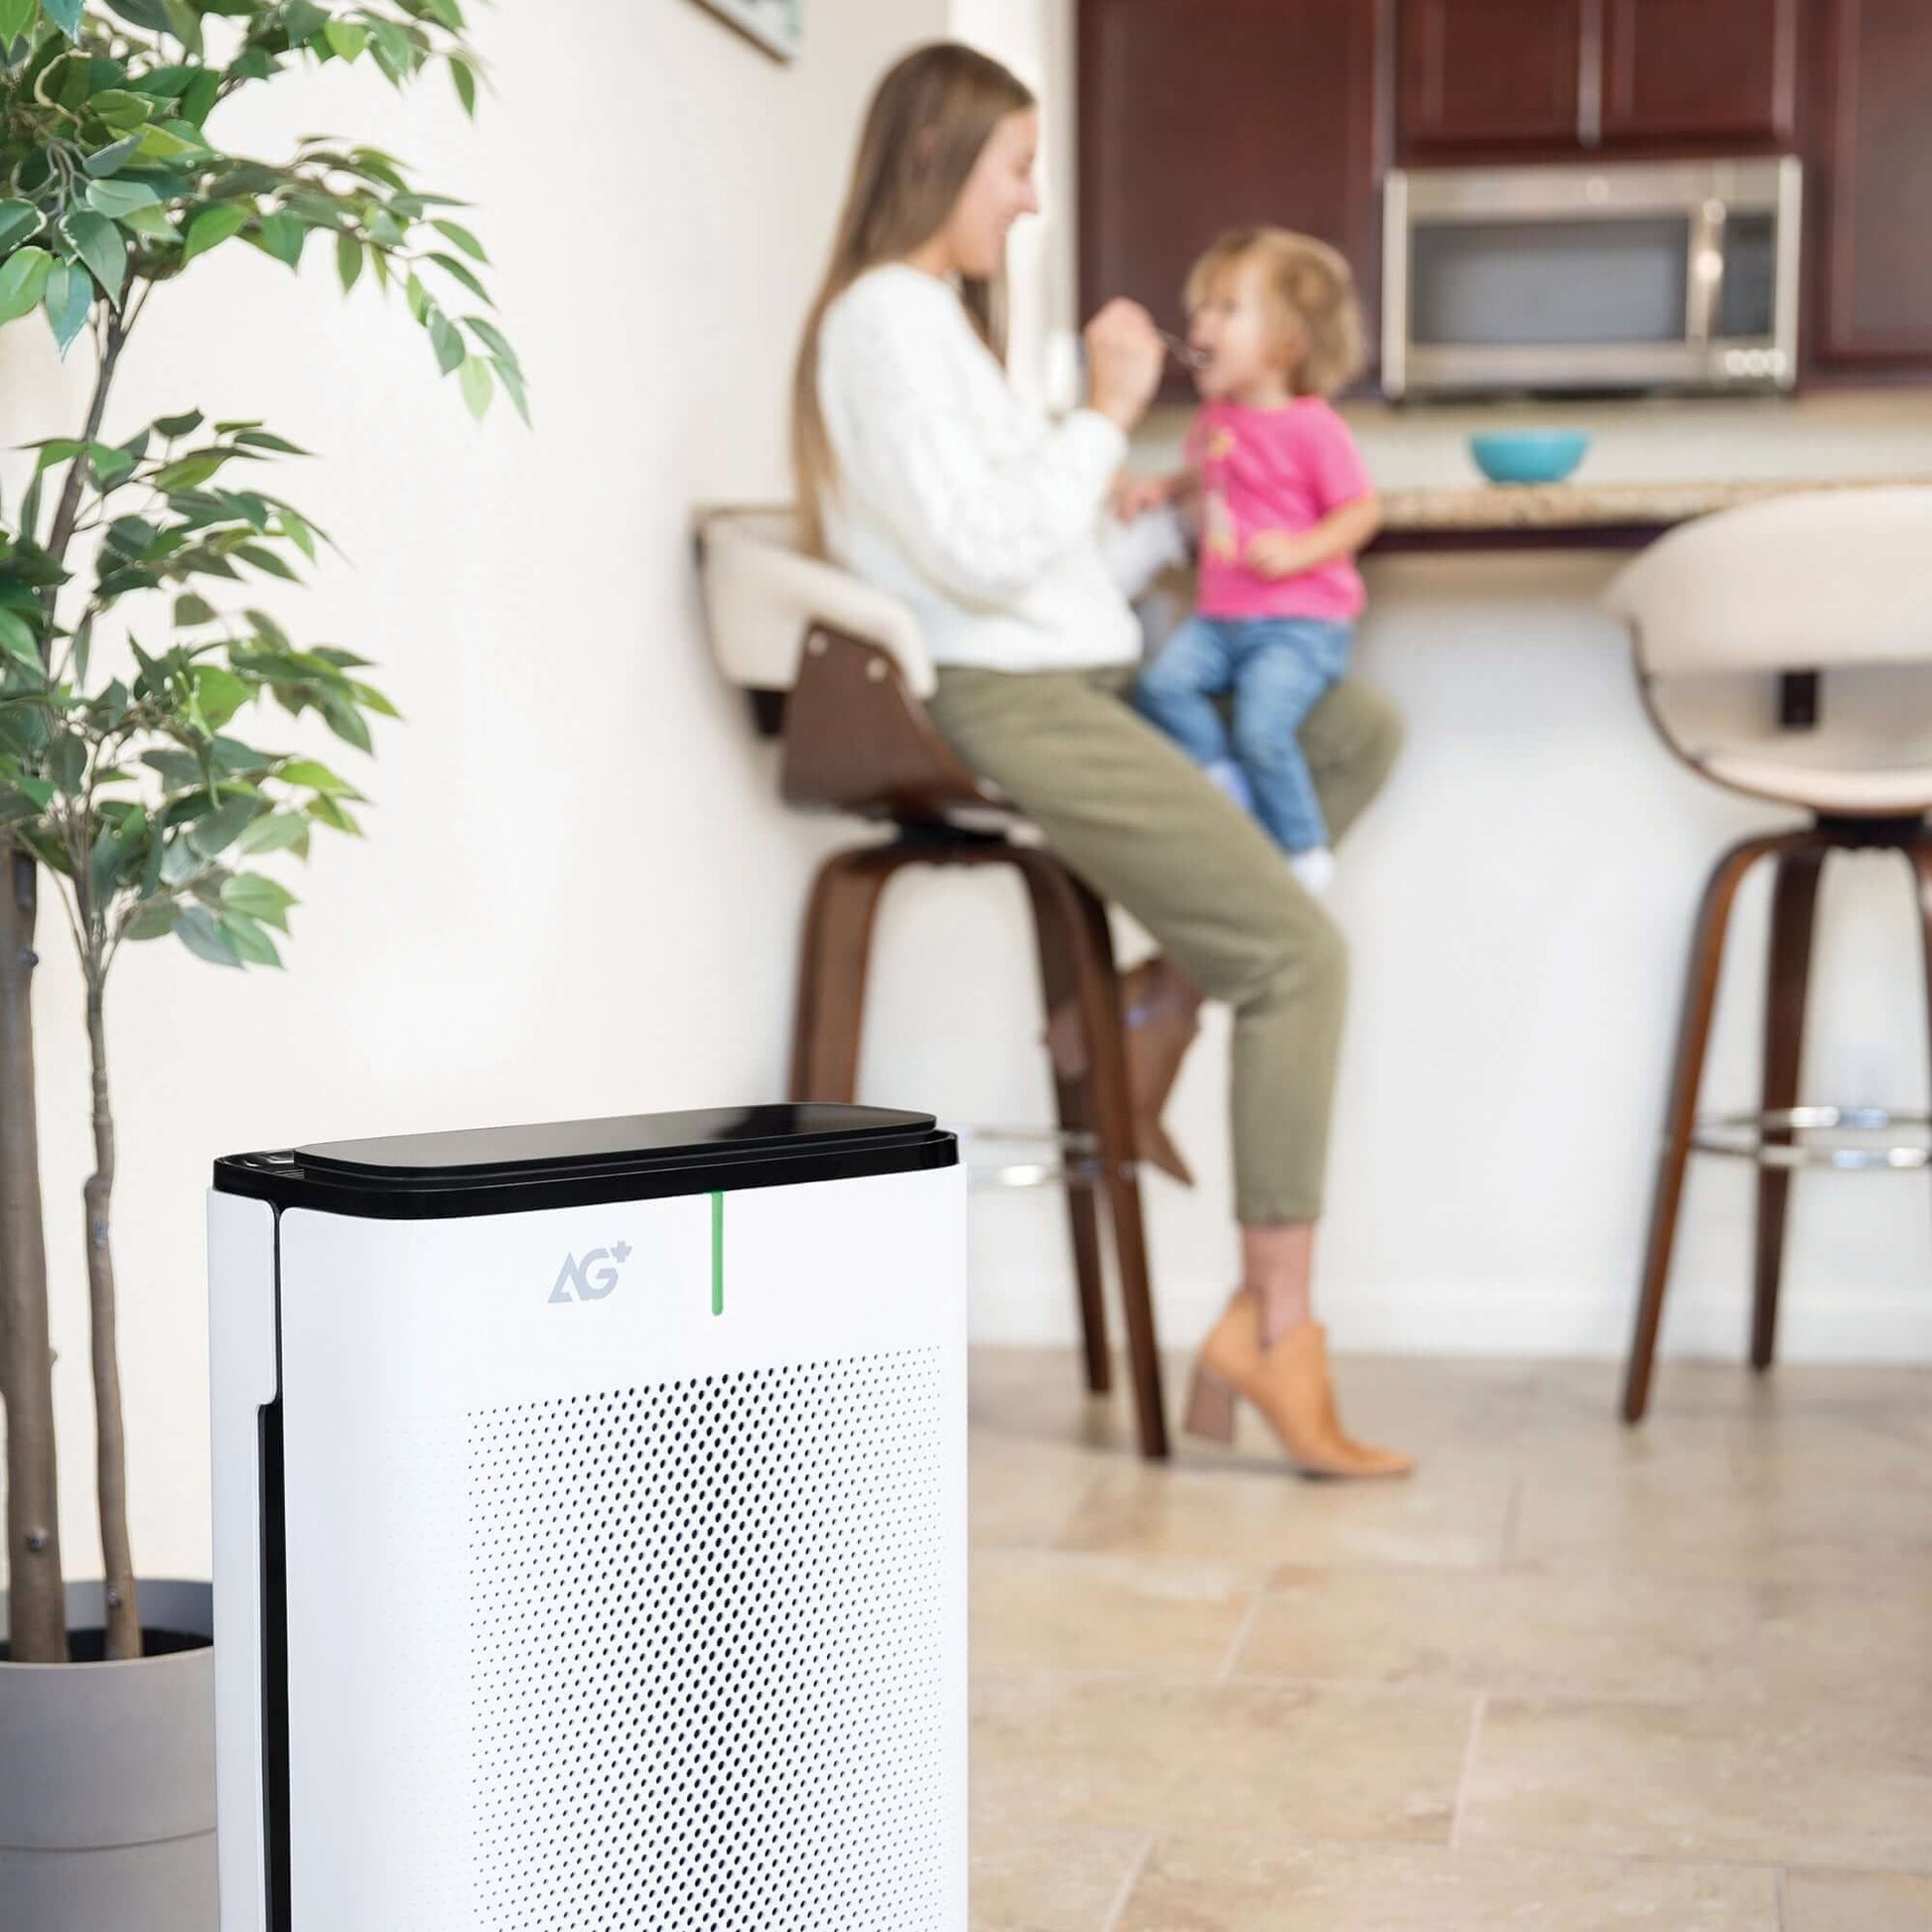 Brondell Pro Sanitizing Air Purifier with AG+ Technology for Purification of SARS-CoV-2, Virus, Bacteria and Allergens - front view in a kitchen